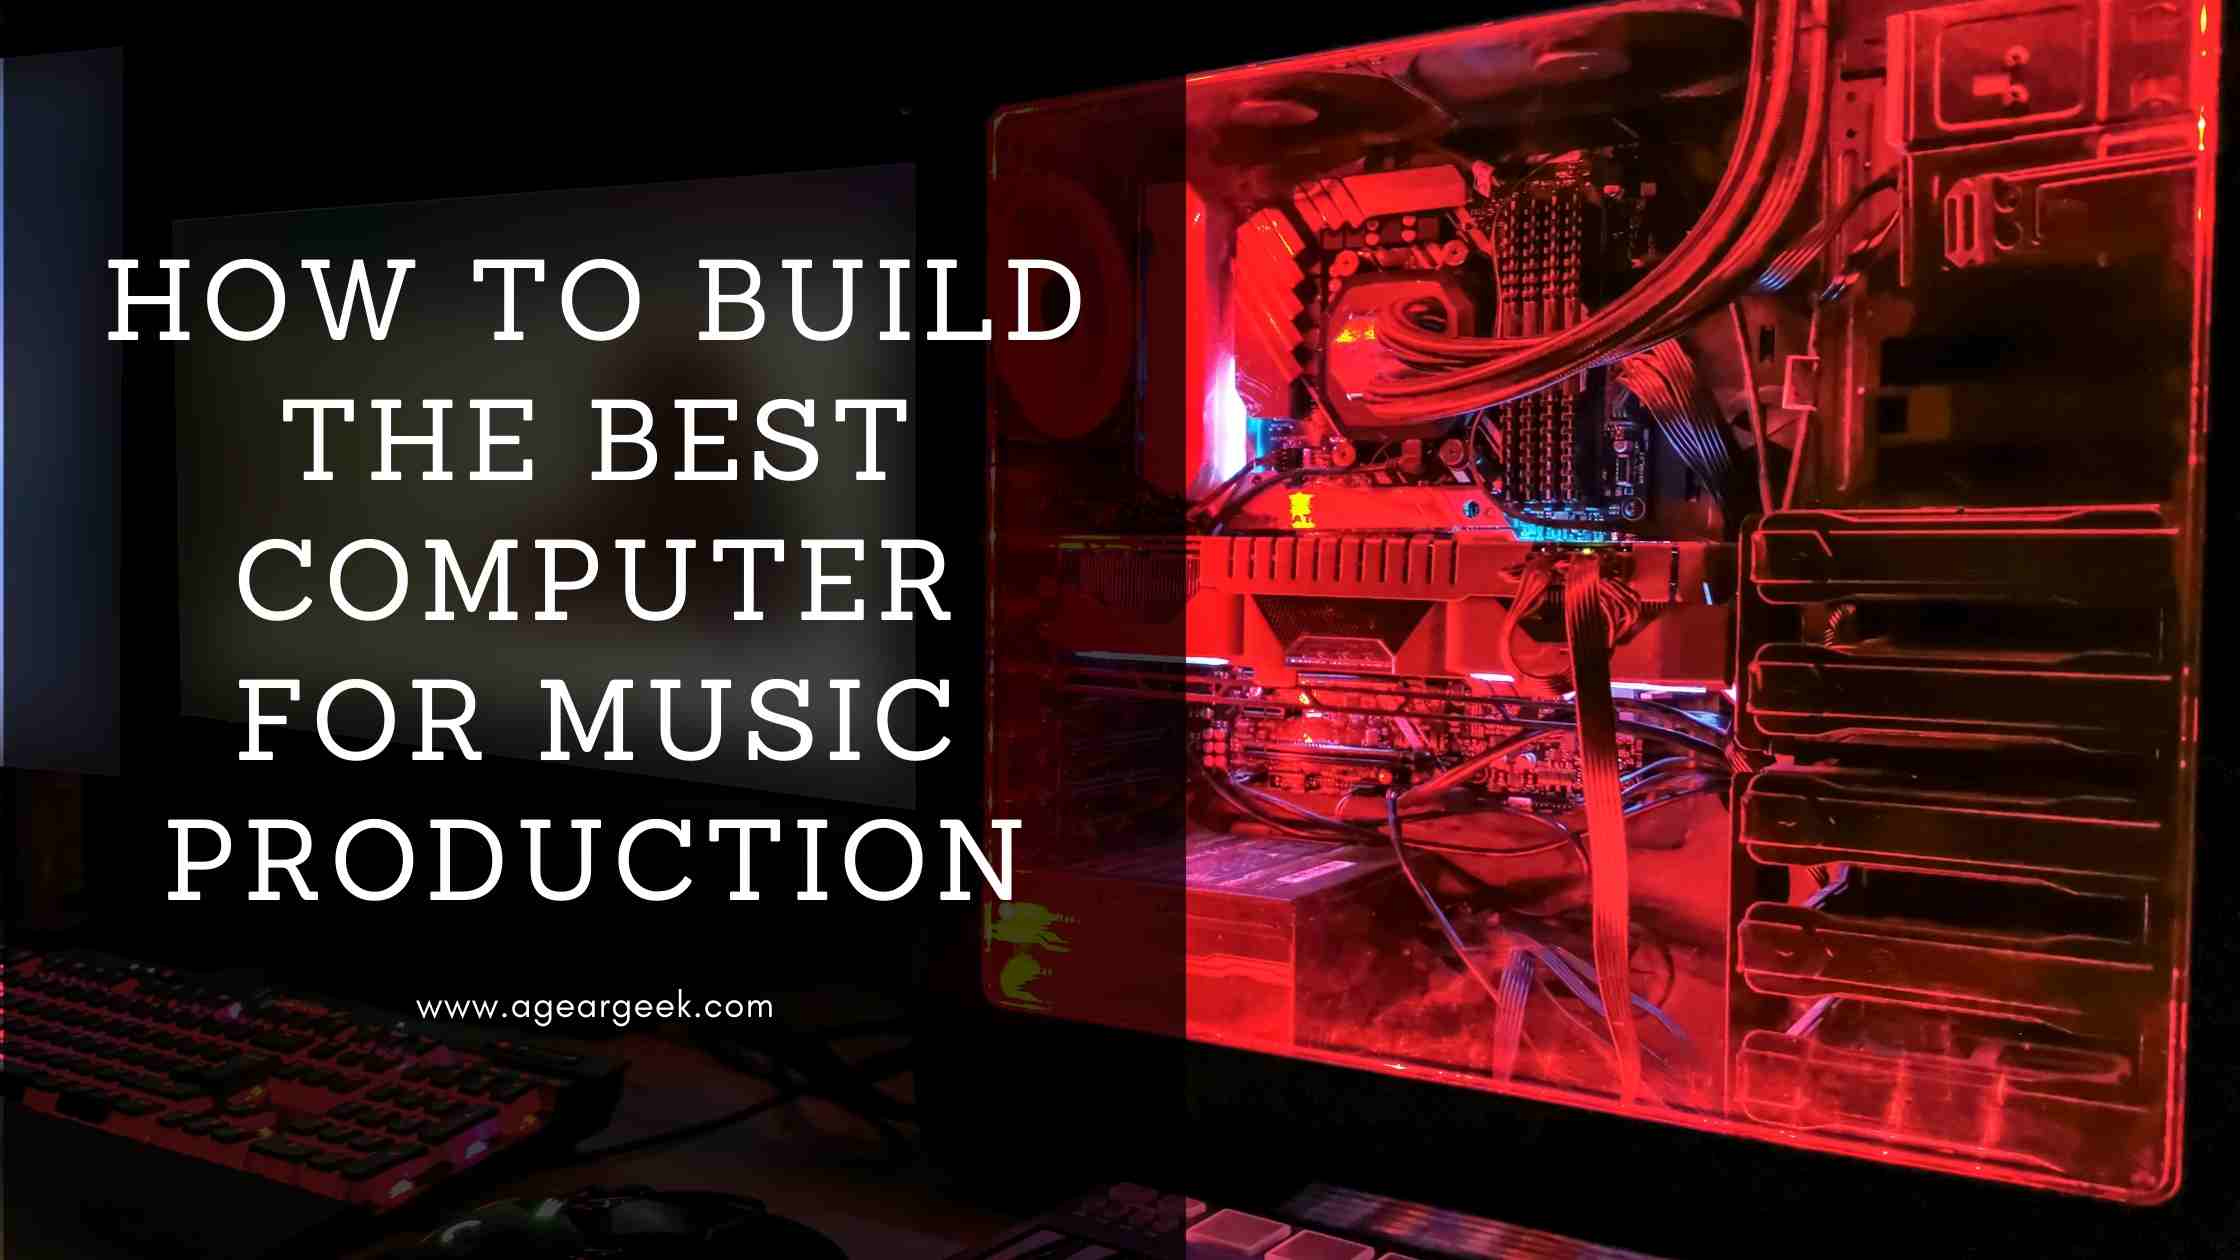 How to build the best computer for music production